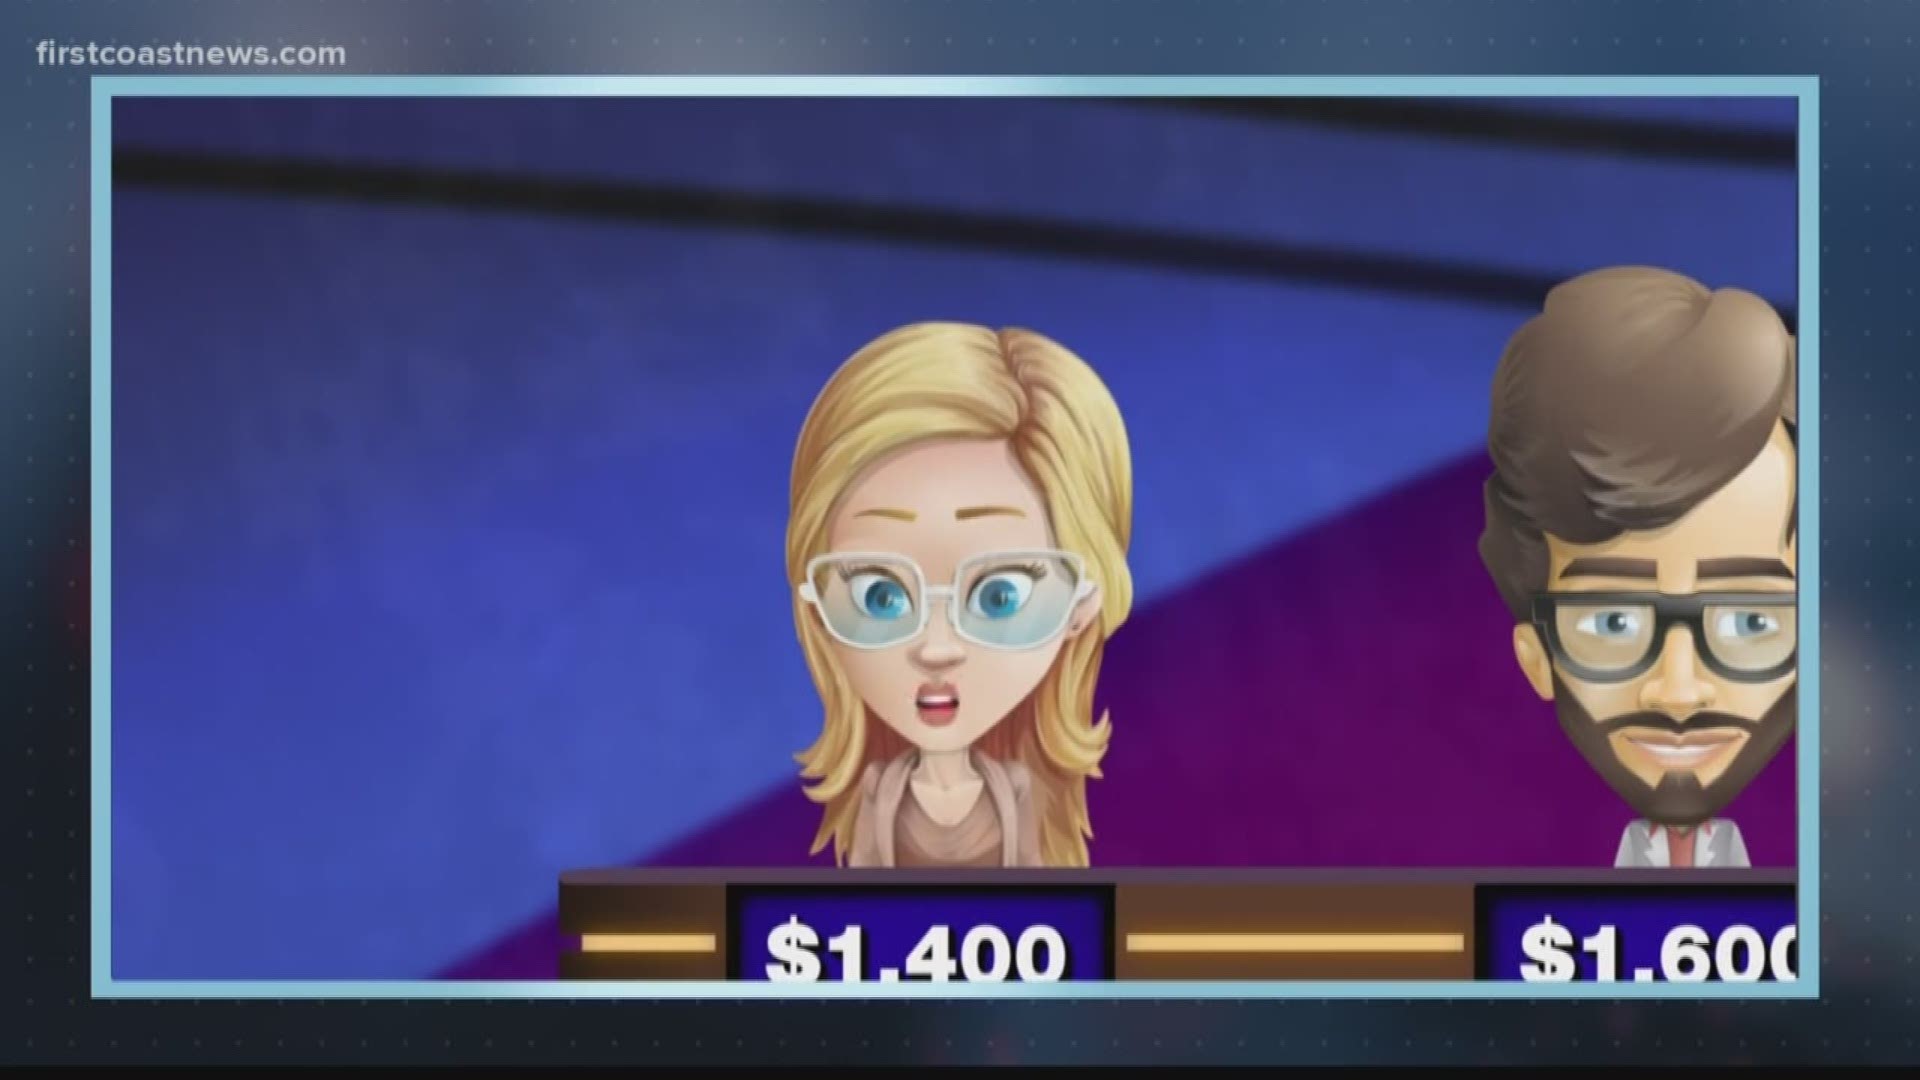 This political ad supporting Mayor Lenny Curry uses animated Jeopardy-style contestants to take three specific jabs at City Council Member Anna Brosche.